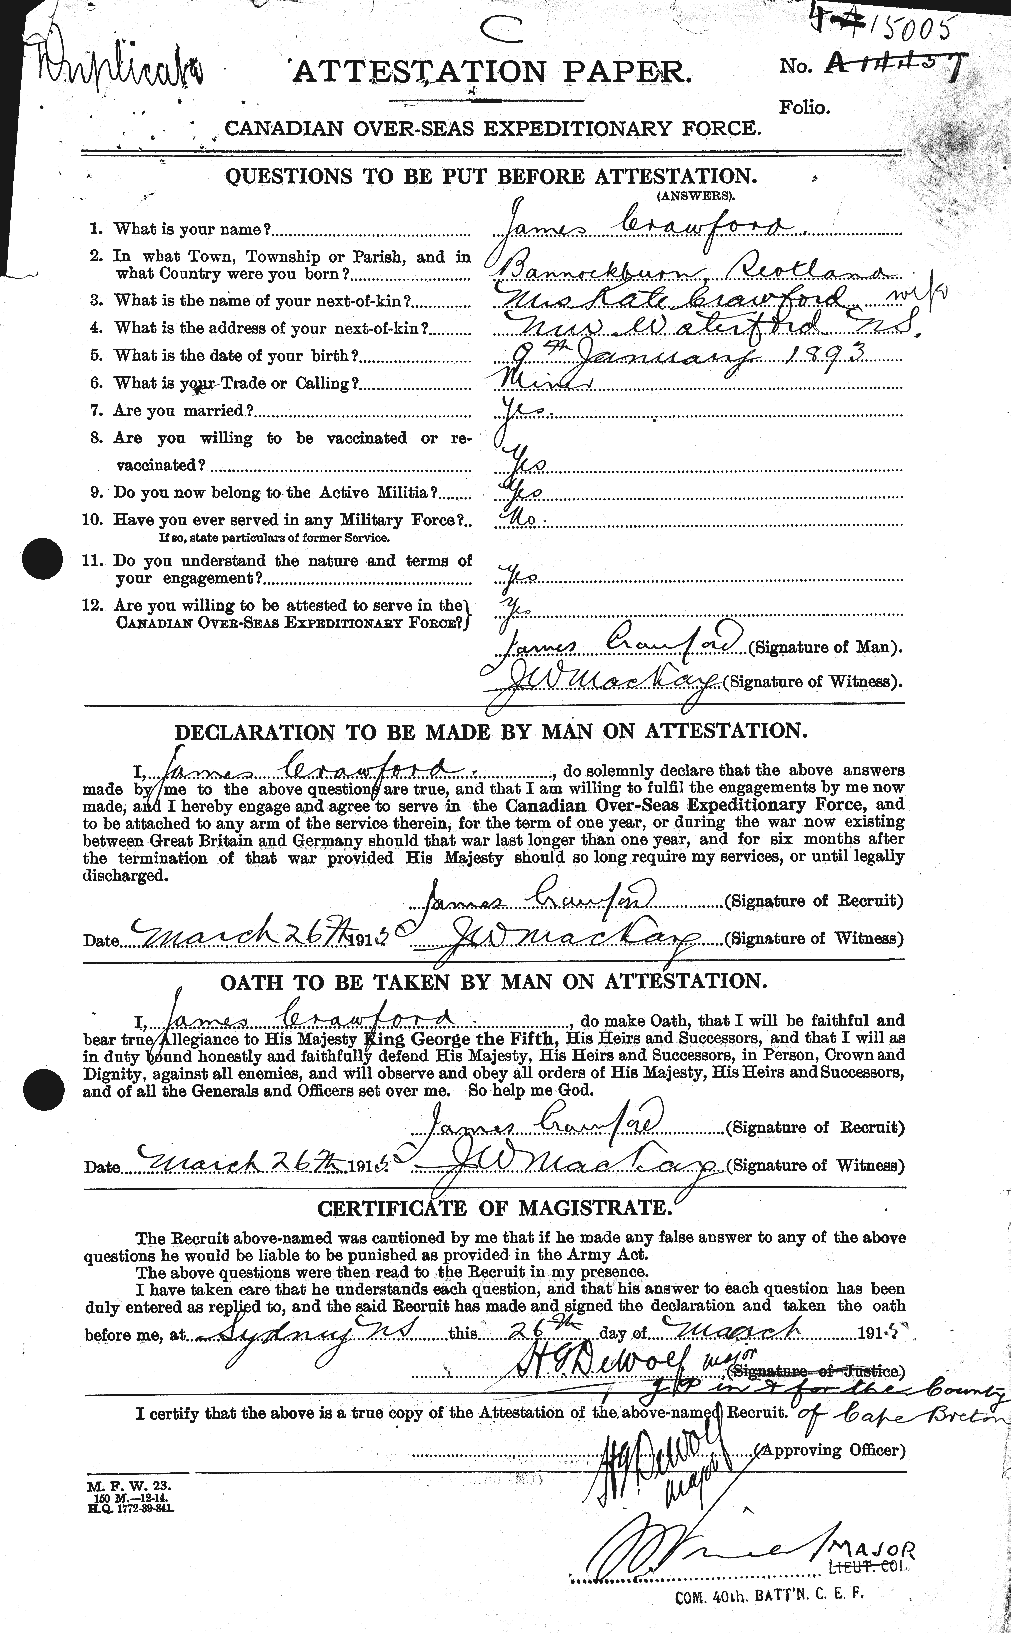 Personnel Records of the First World War - CEF 062774a